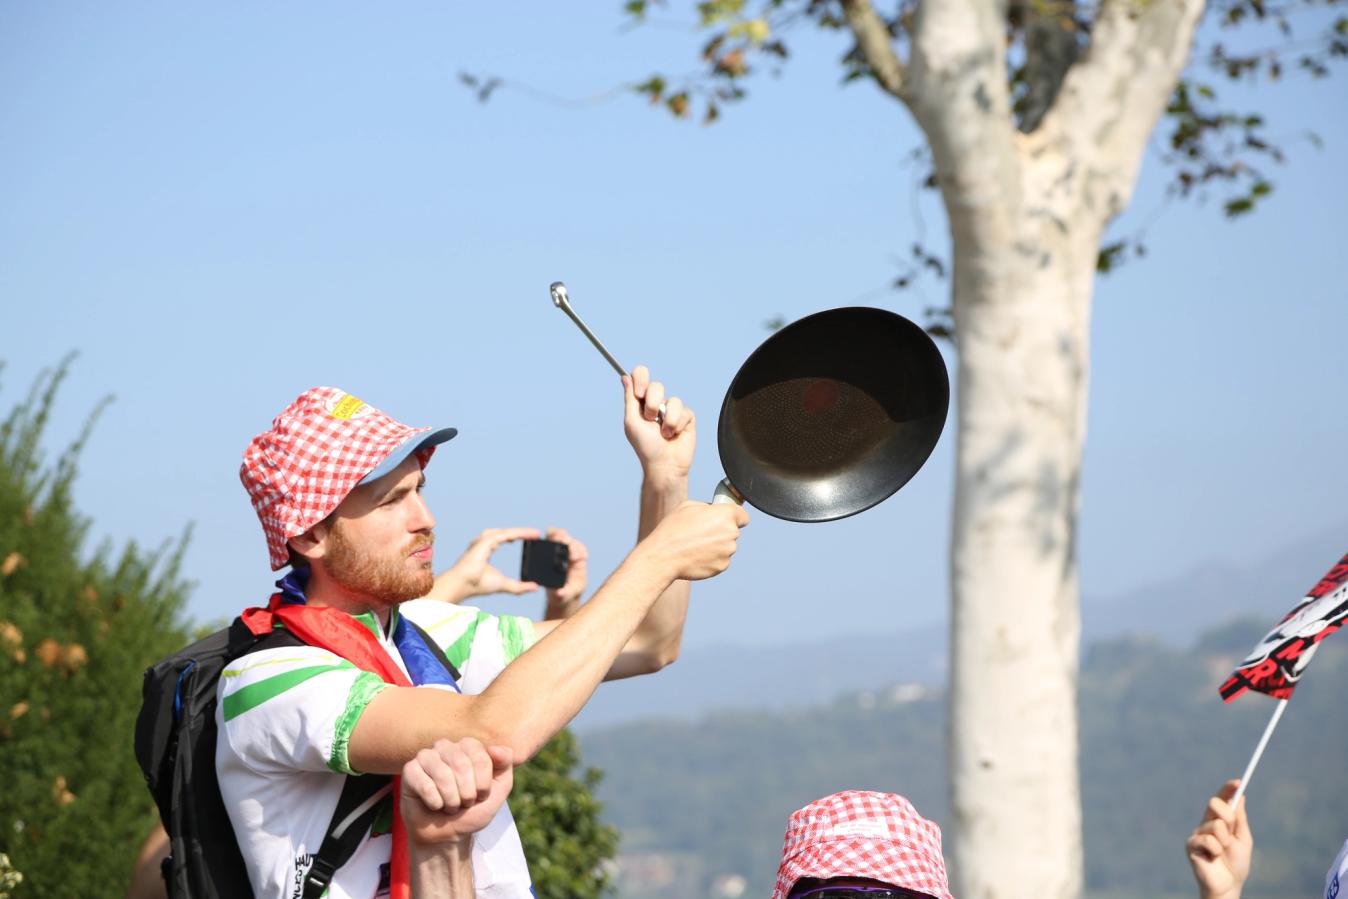 Not far from La Boccola, the Ultras regrouped for another opportunity to practise their melodies ahead of the race. Out came the pots and pans to orchestrate the choir